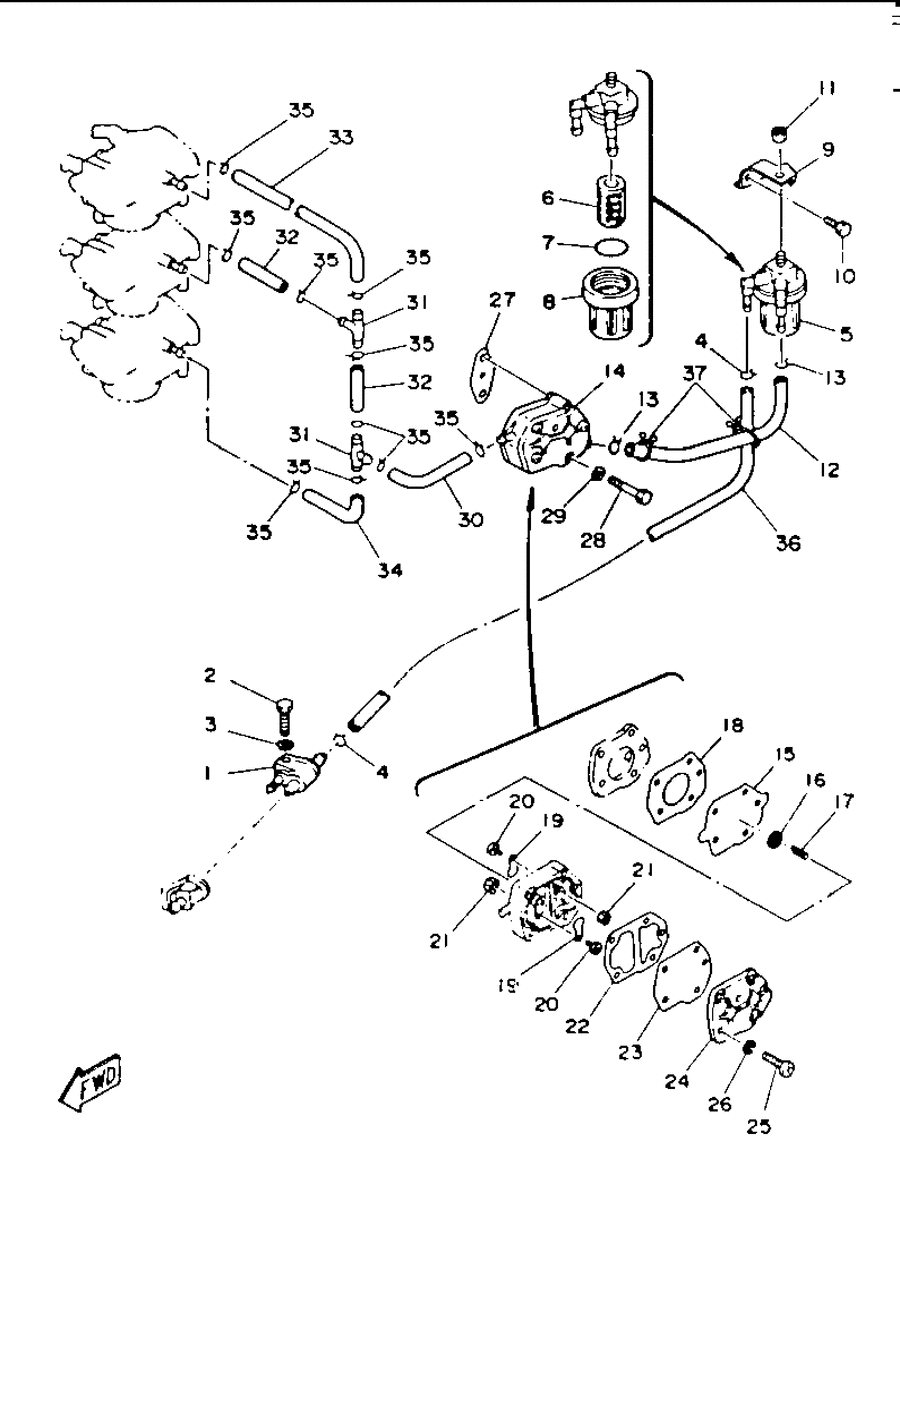 1990 40SD FUEL SYSTEM